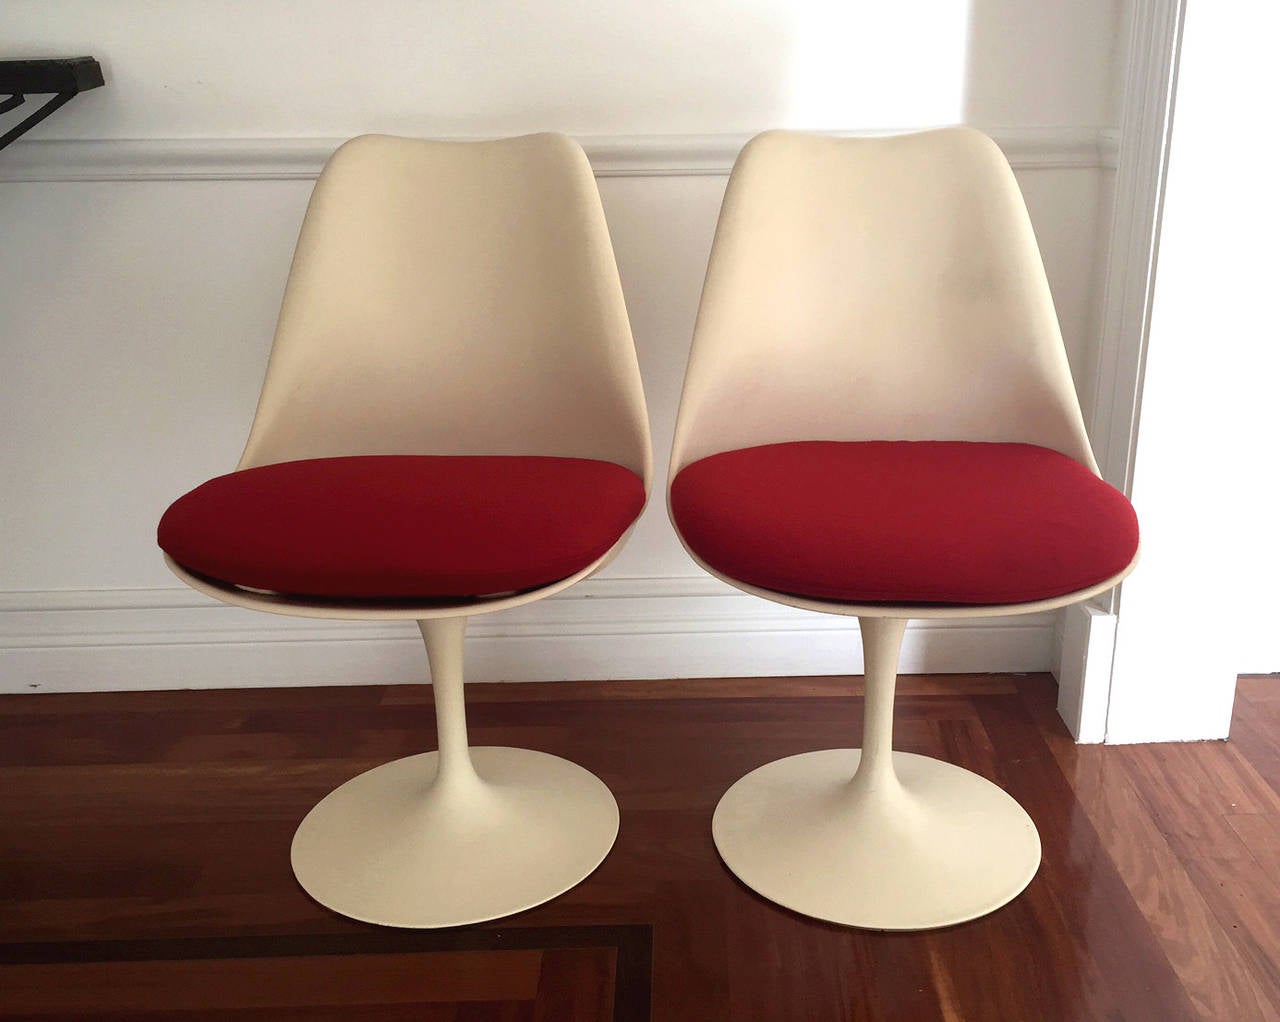 A pair of iconic tulip swivel chairs designed by Eero Saarinen for Knoll. These chairs are authentic Knoll production dated 1972. New red wool cushions custom made. Retains Knoll stickers.